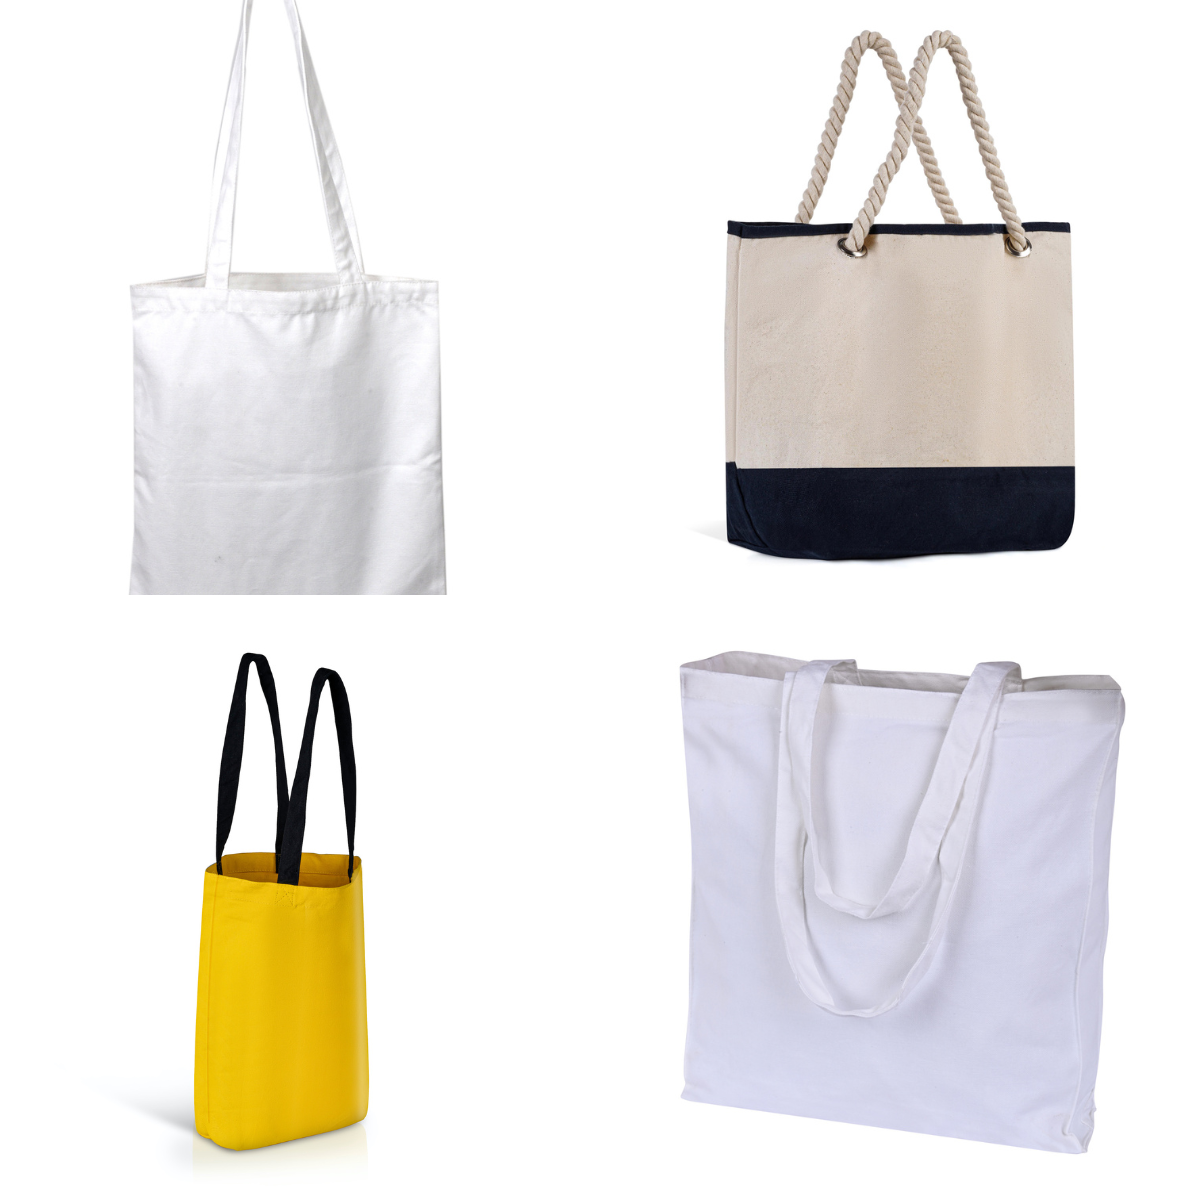 Canvas Bags Family Offer Set of 4 - No Plastic Shop